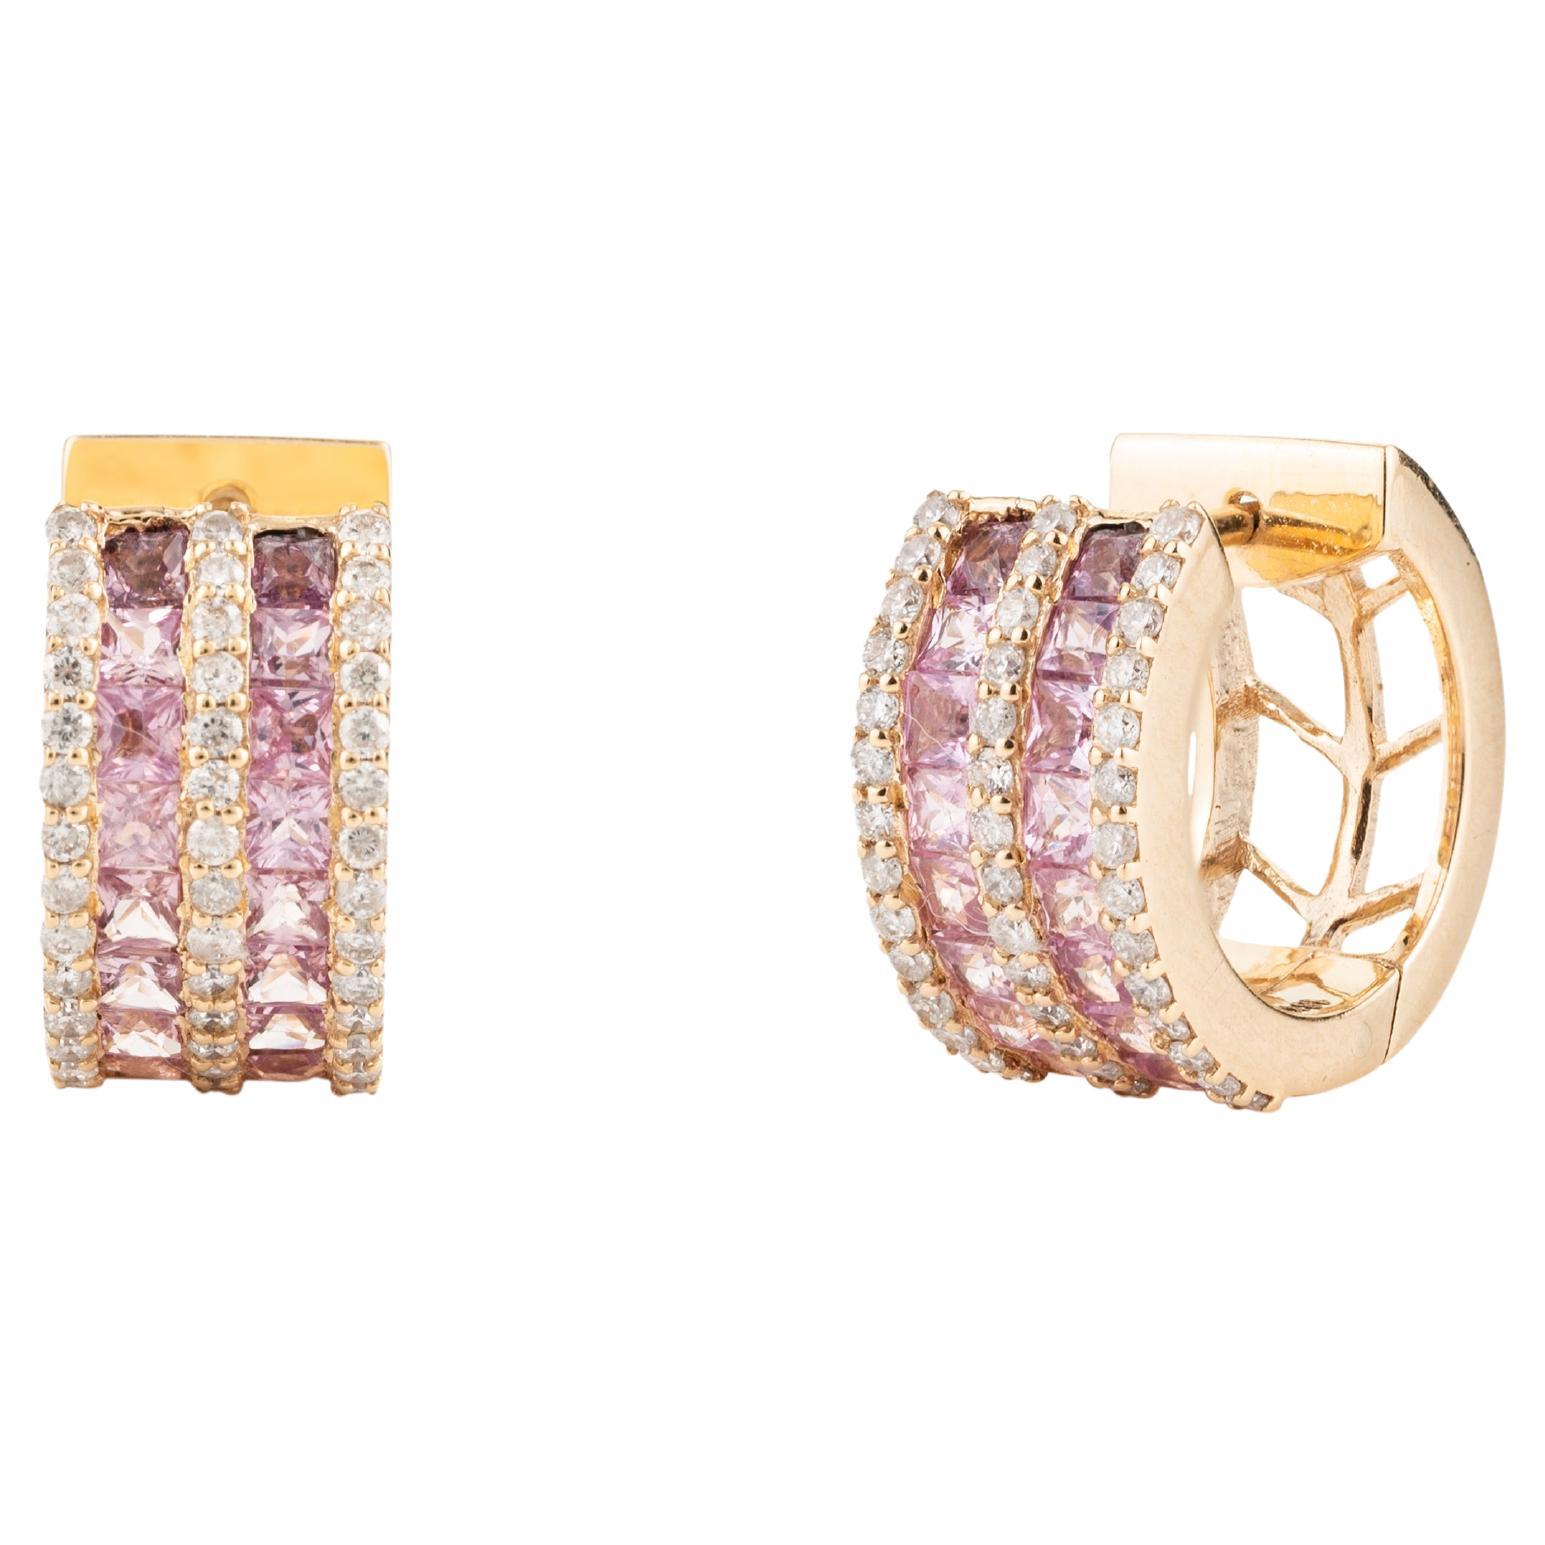 Pink Sapphire and Diamond Huggie Hoop Earring in 18K Gold to make a statement with your look. You shall need hoop earrings to make a statement with your look. These earrings create a sparkling, luxurious look featuring square cut pink sapphires and